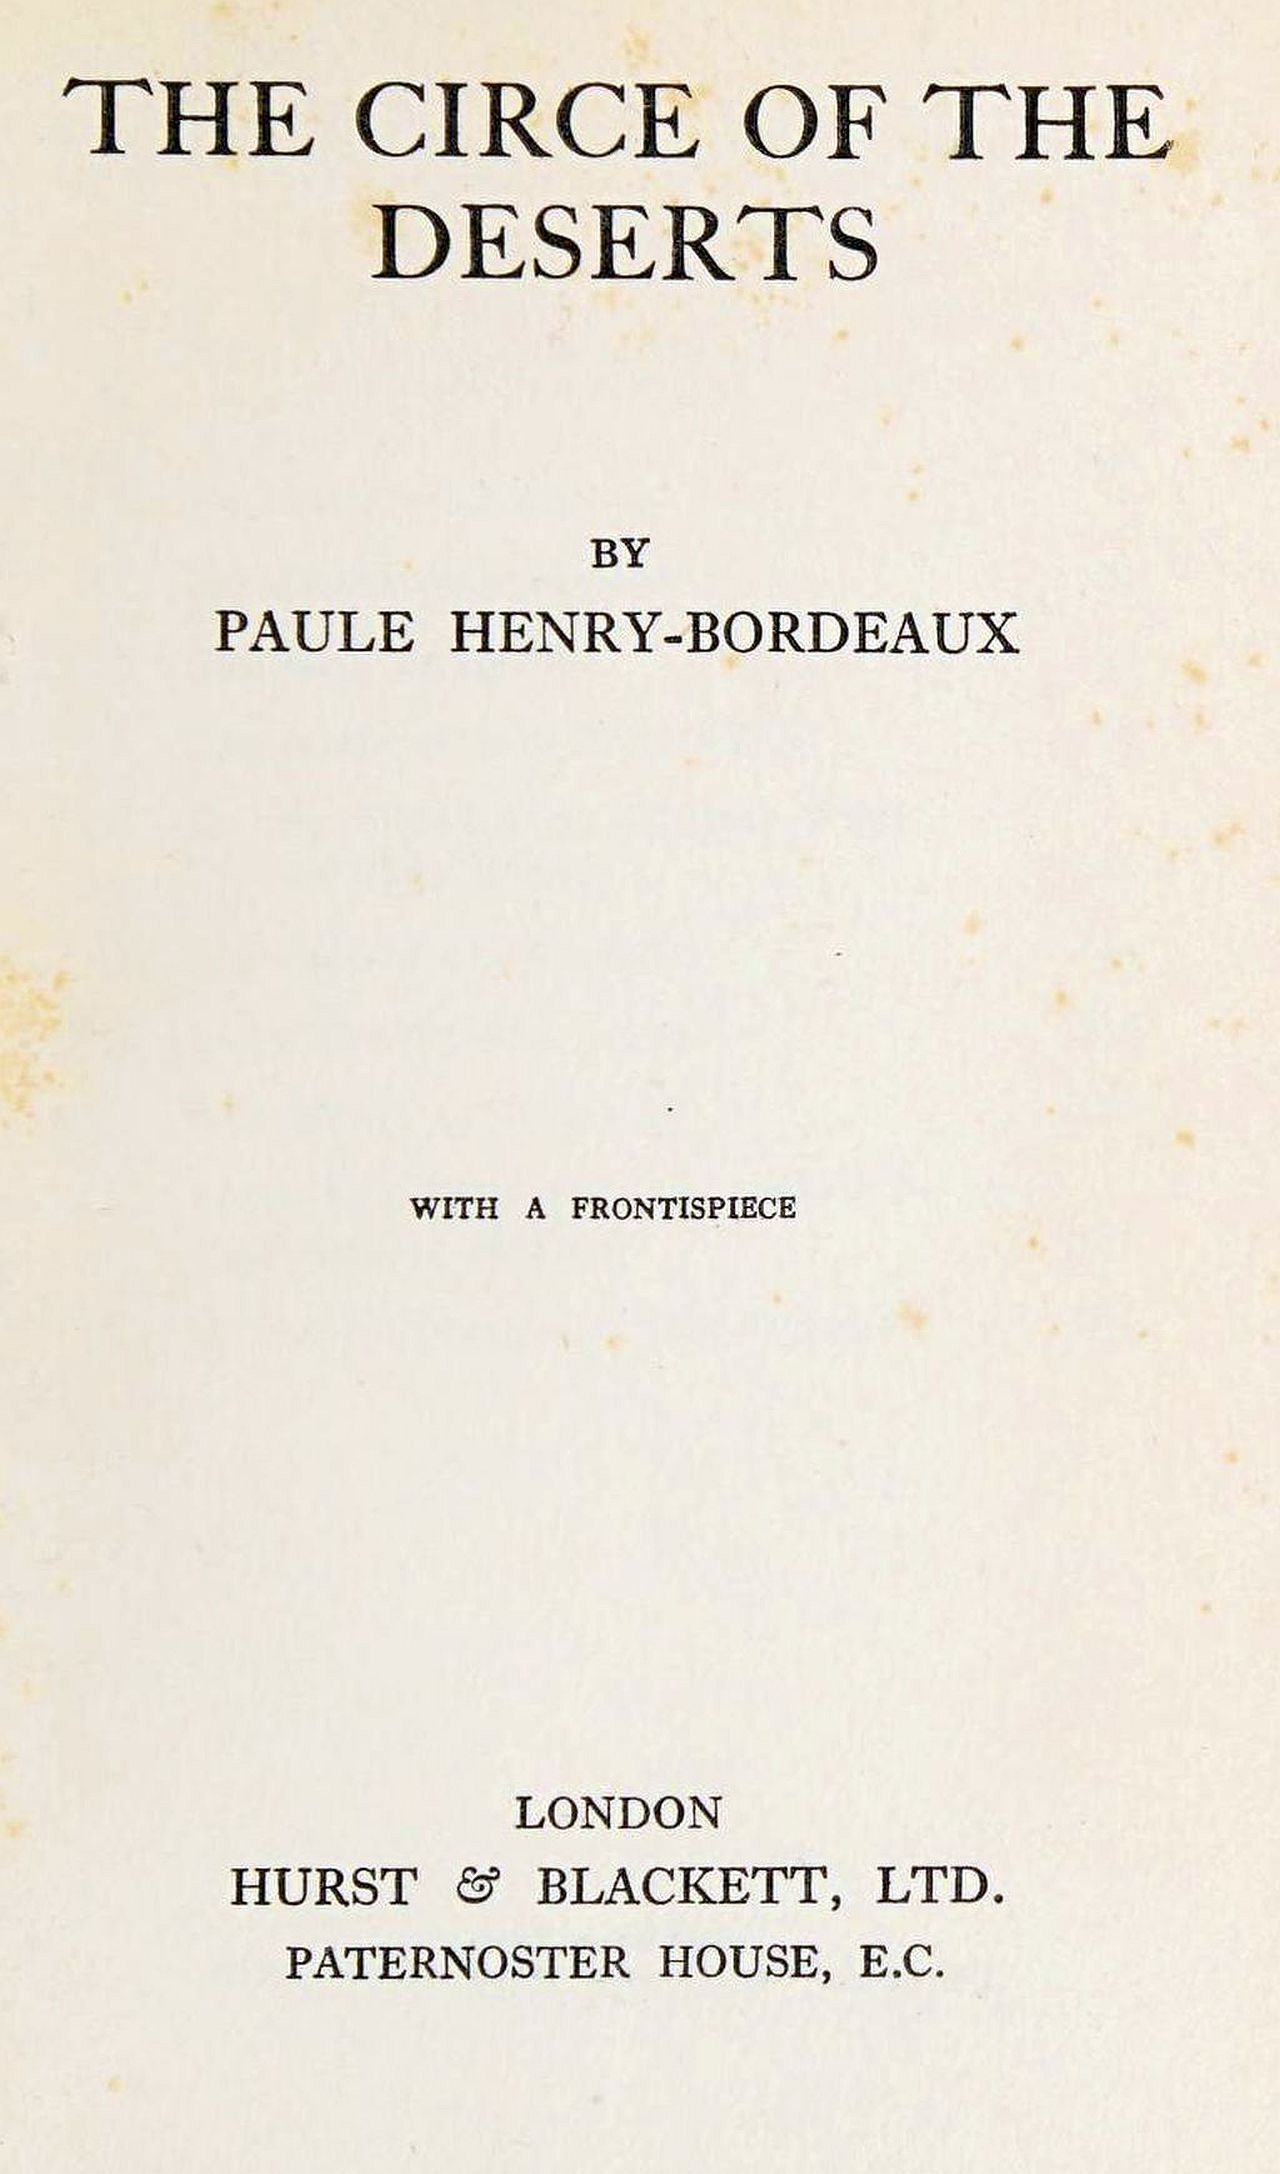 The Project Gutenberg eBook of The circe of the deserts, by Paule  Henry-Bordeaux.